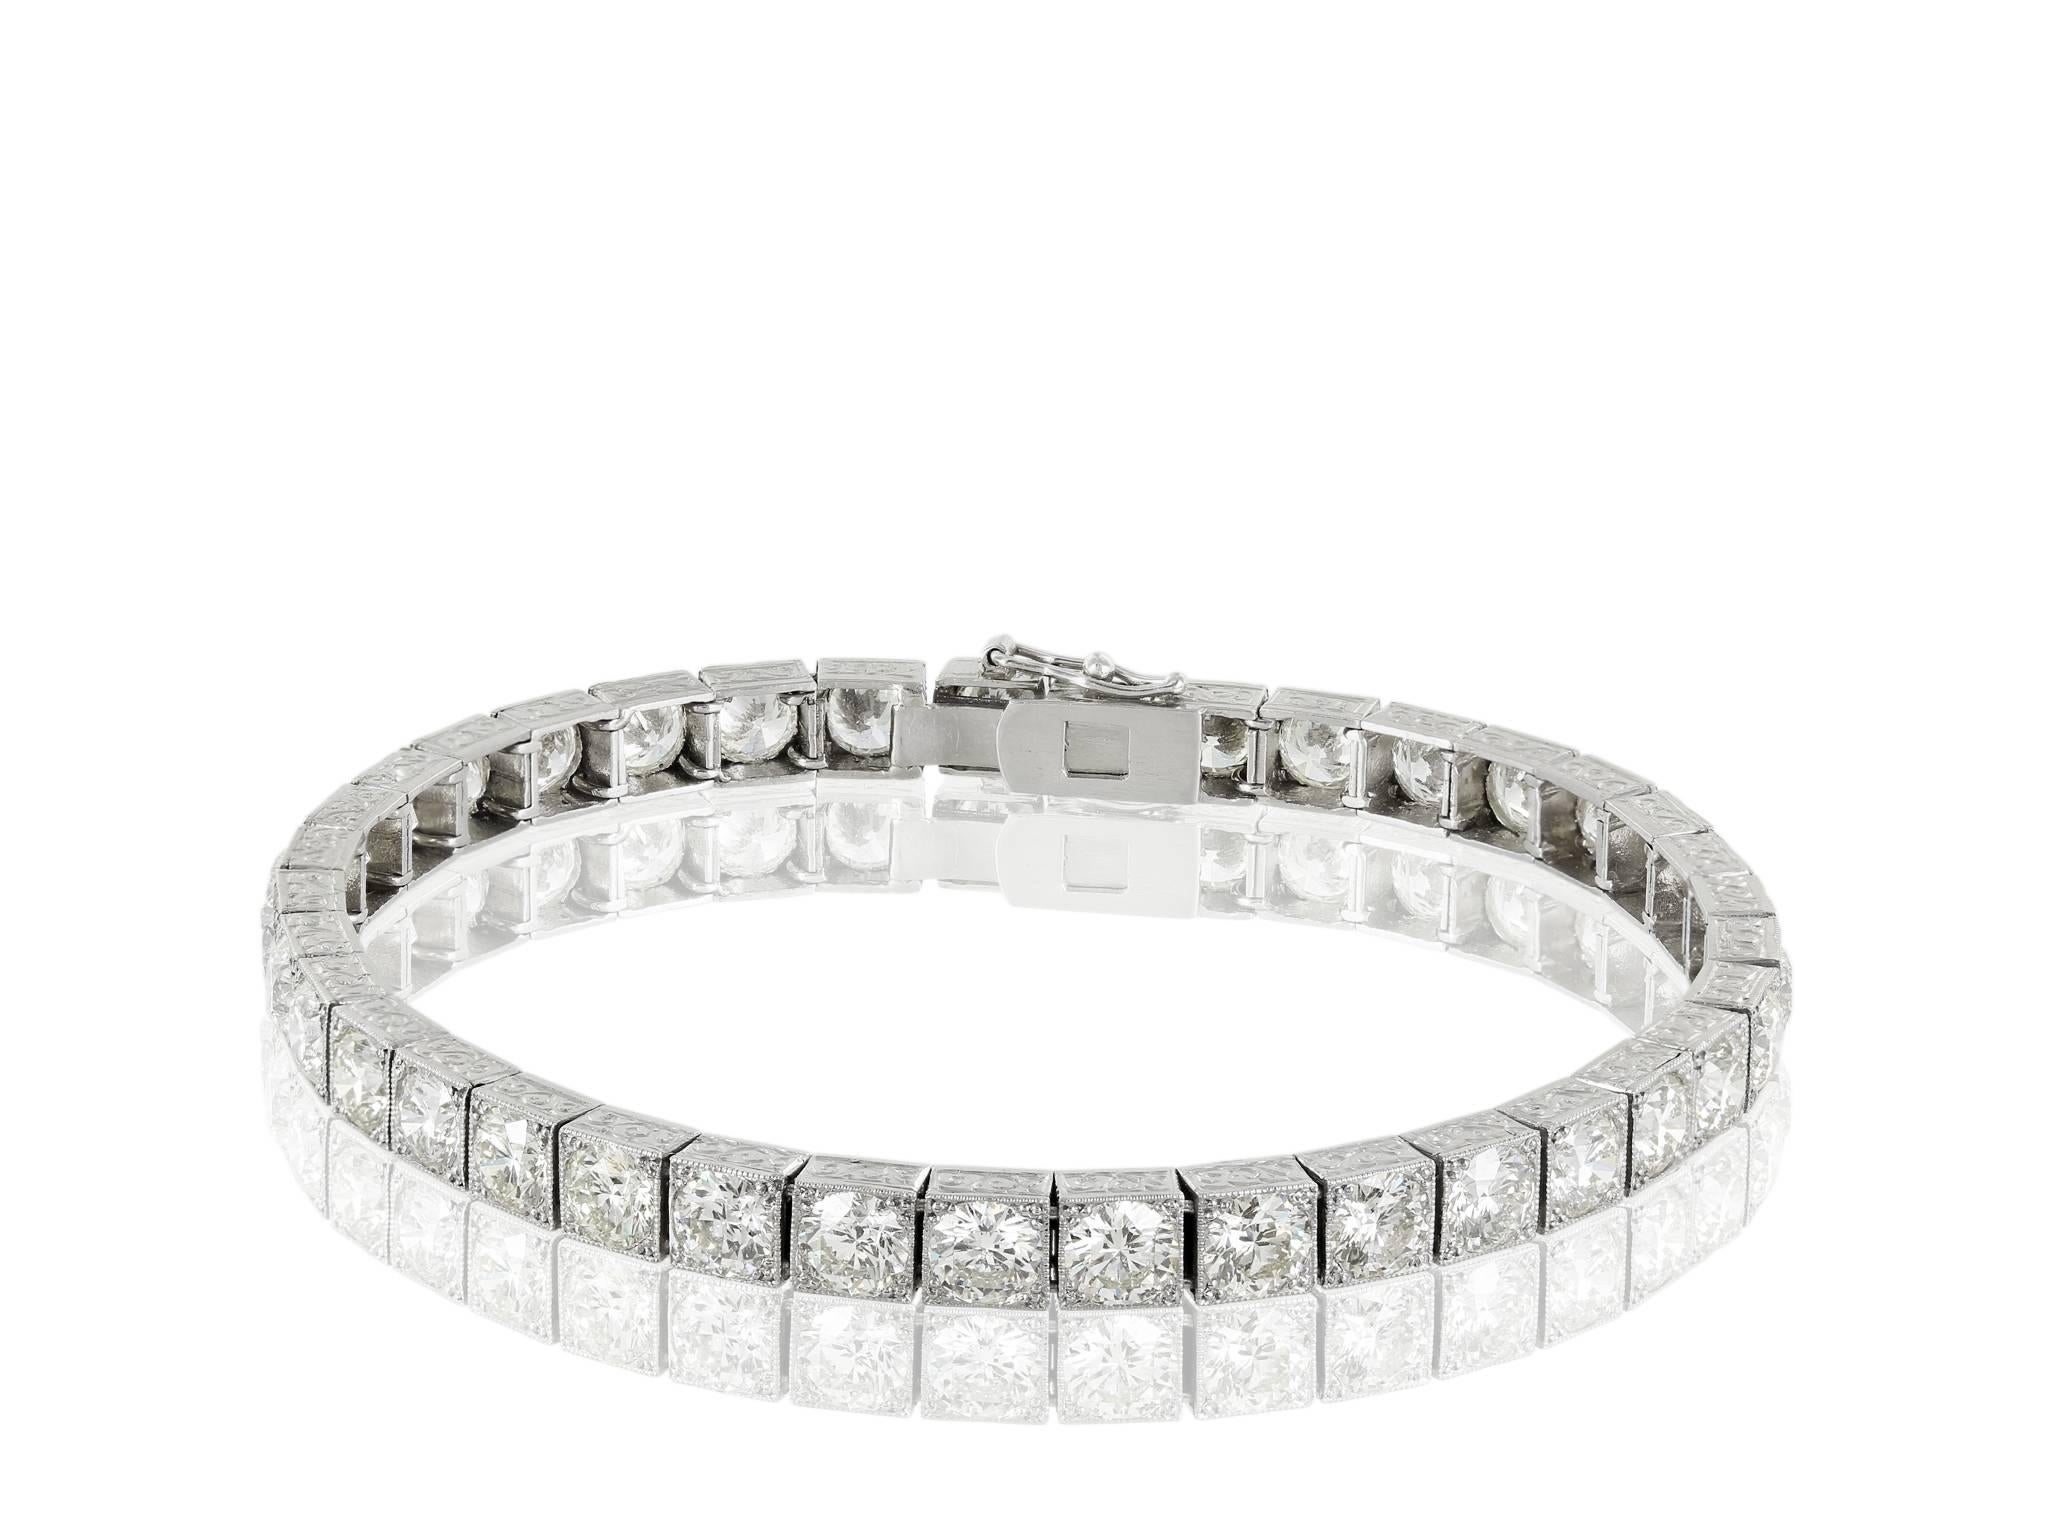 Platinum vintage style engraved block bracelet consisting of 37 round brilliant cut diamonds having a total weight of approximately 14.00 carats.